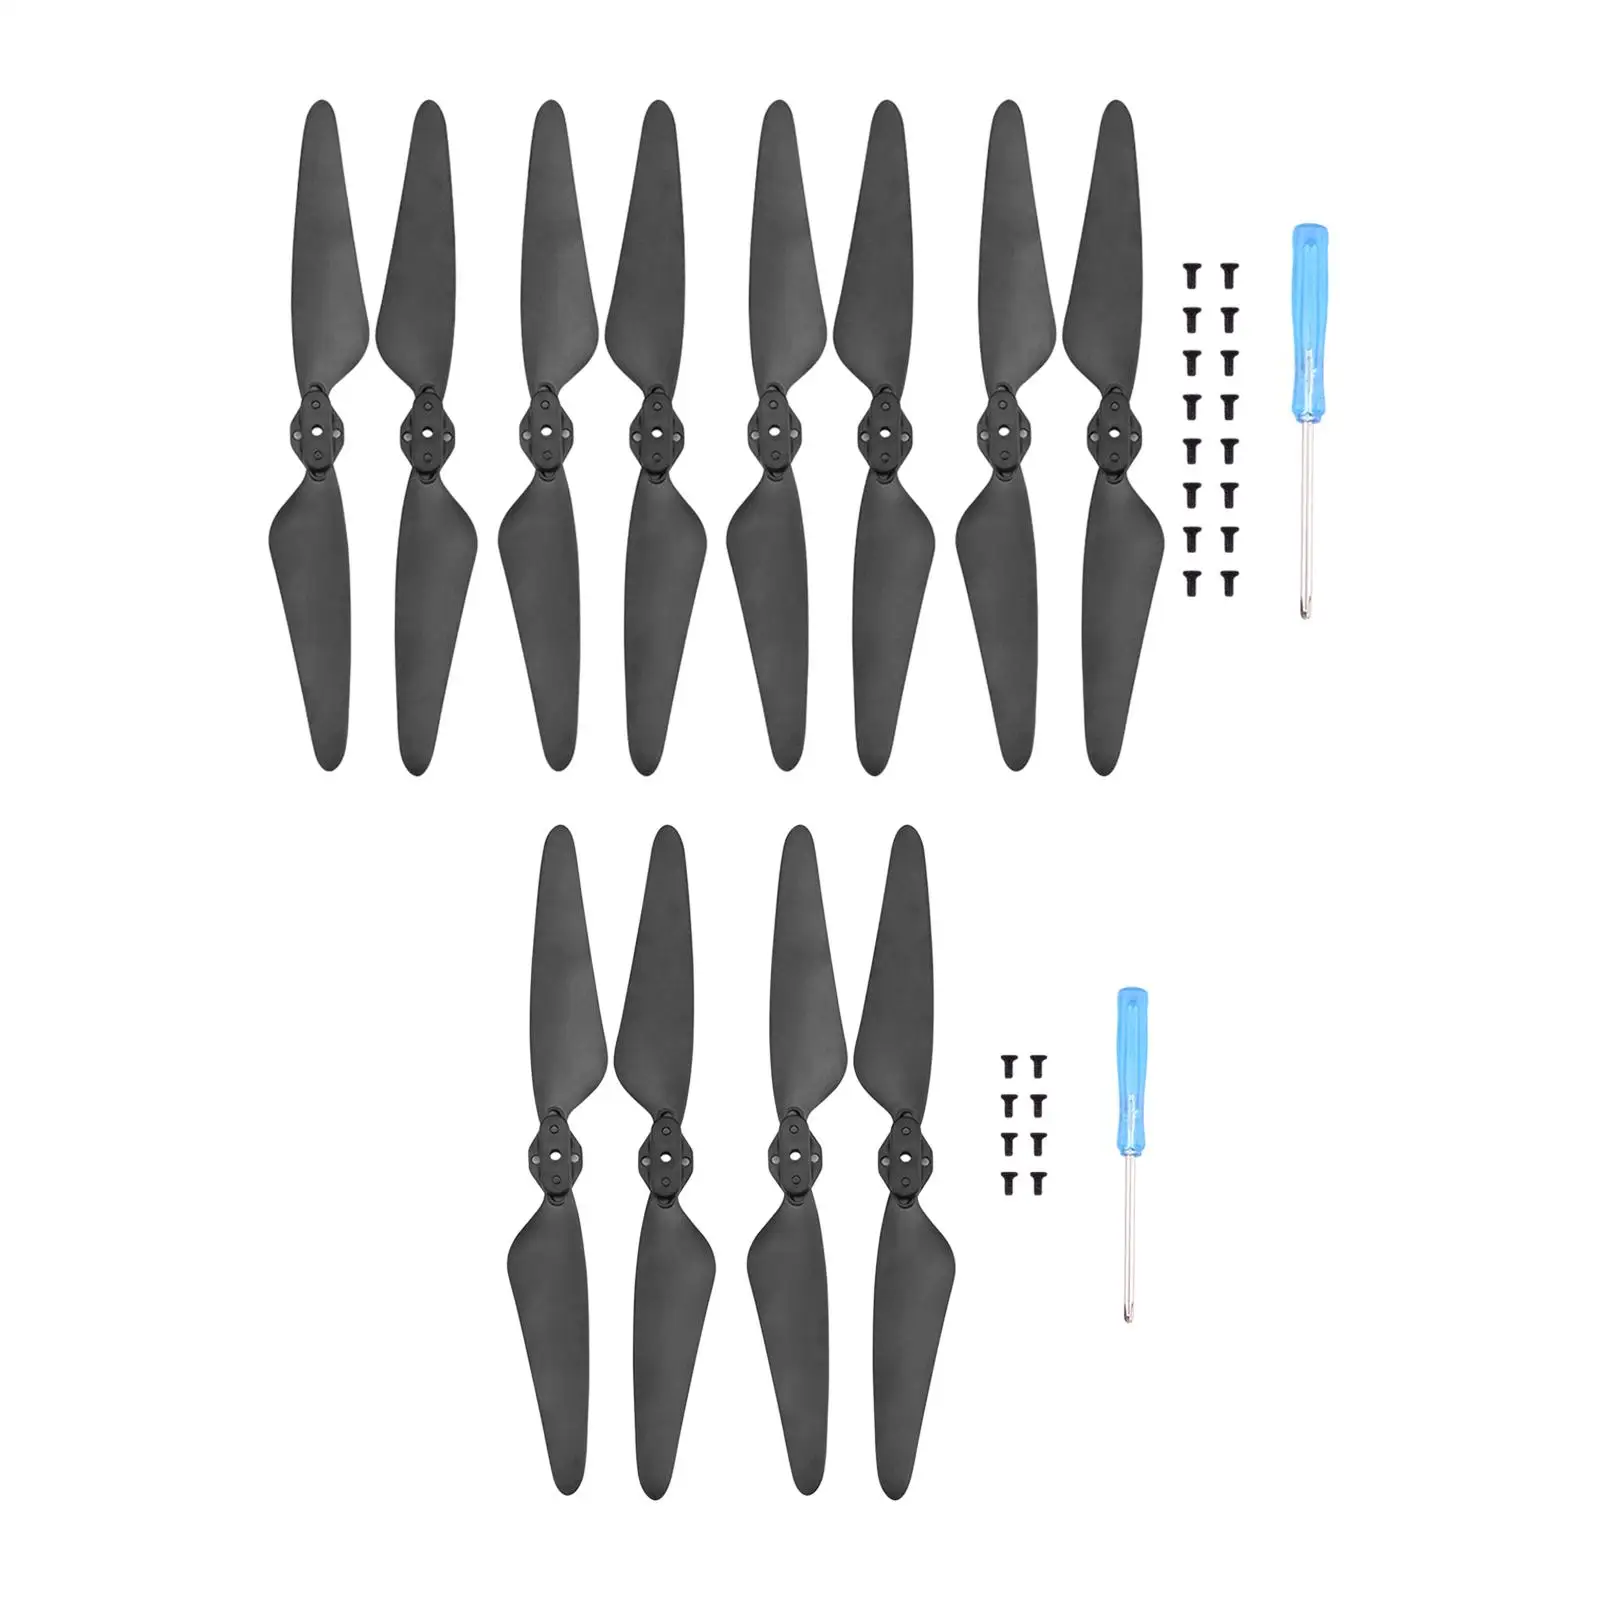 Replacement Propellers Paddle, Low Noise Well Balanced Lightweight Props for Beast3 SG906 Max RC drones